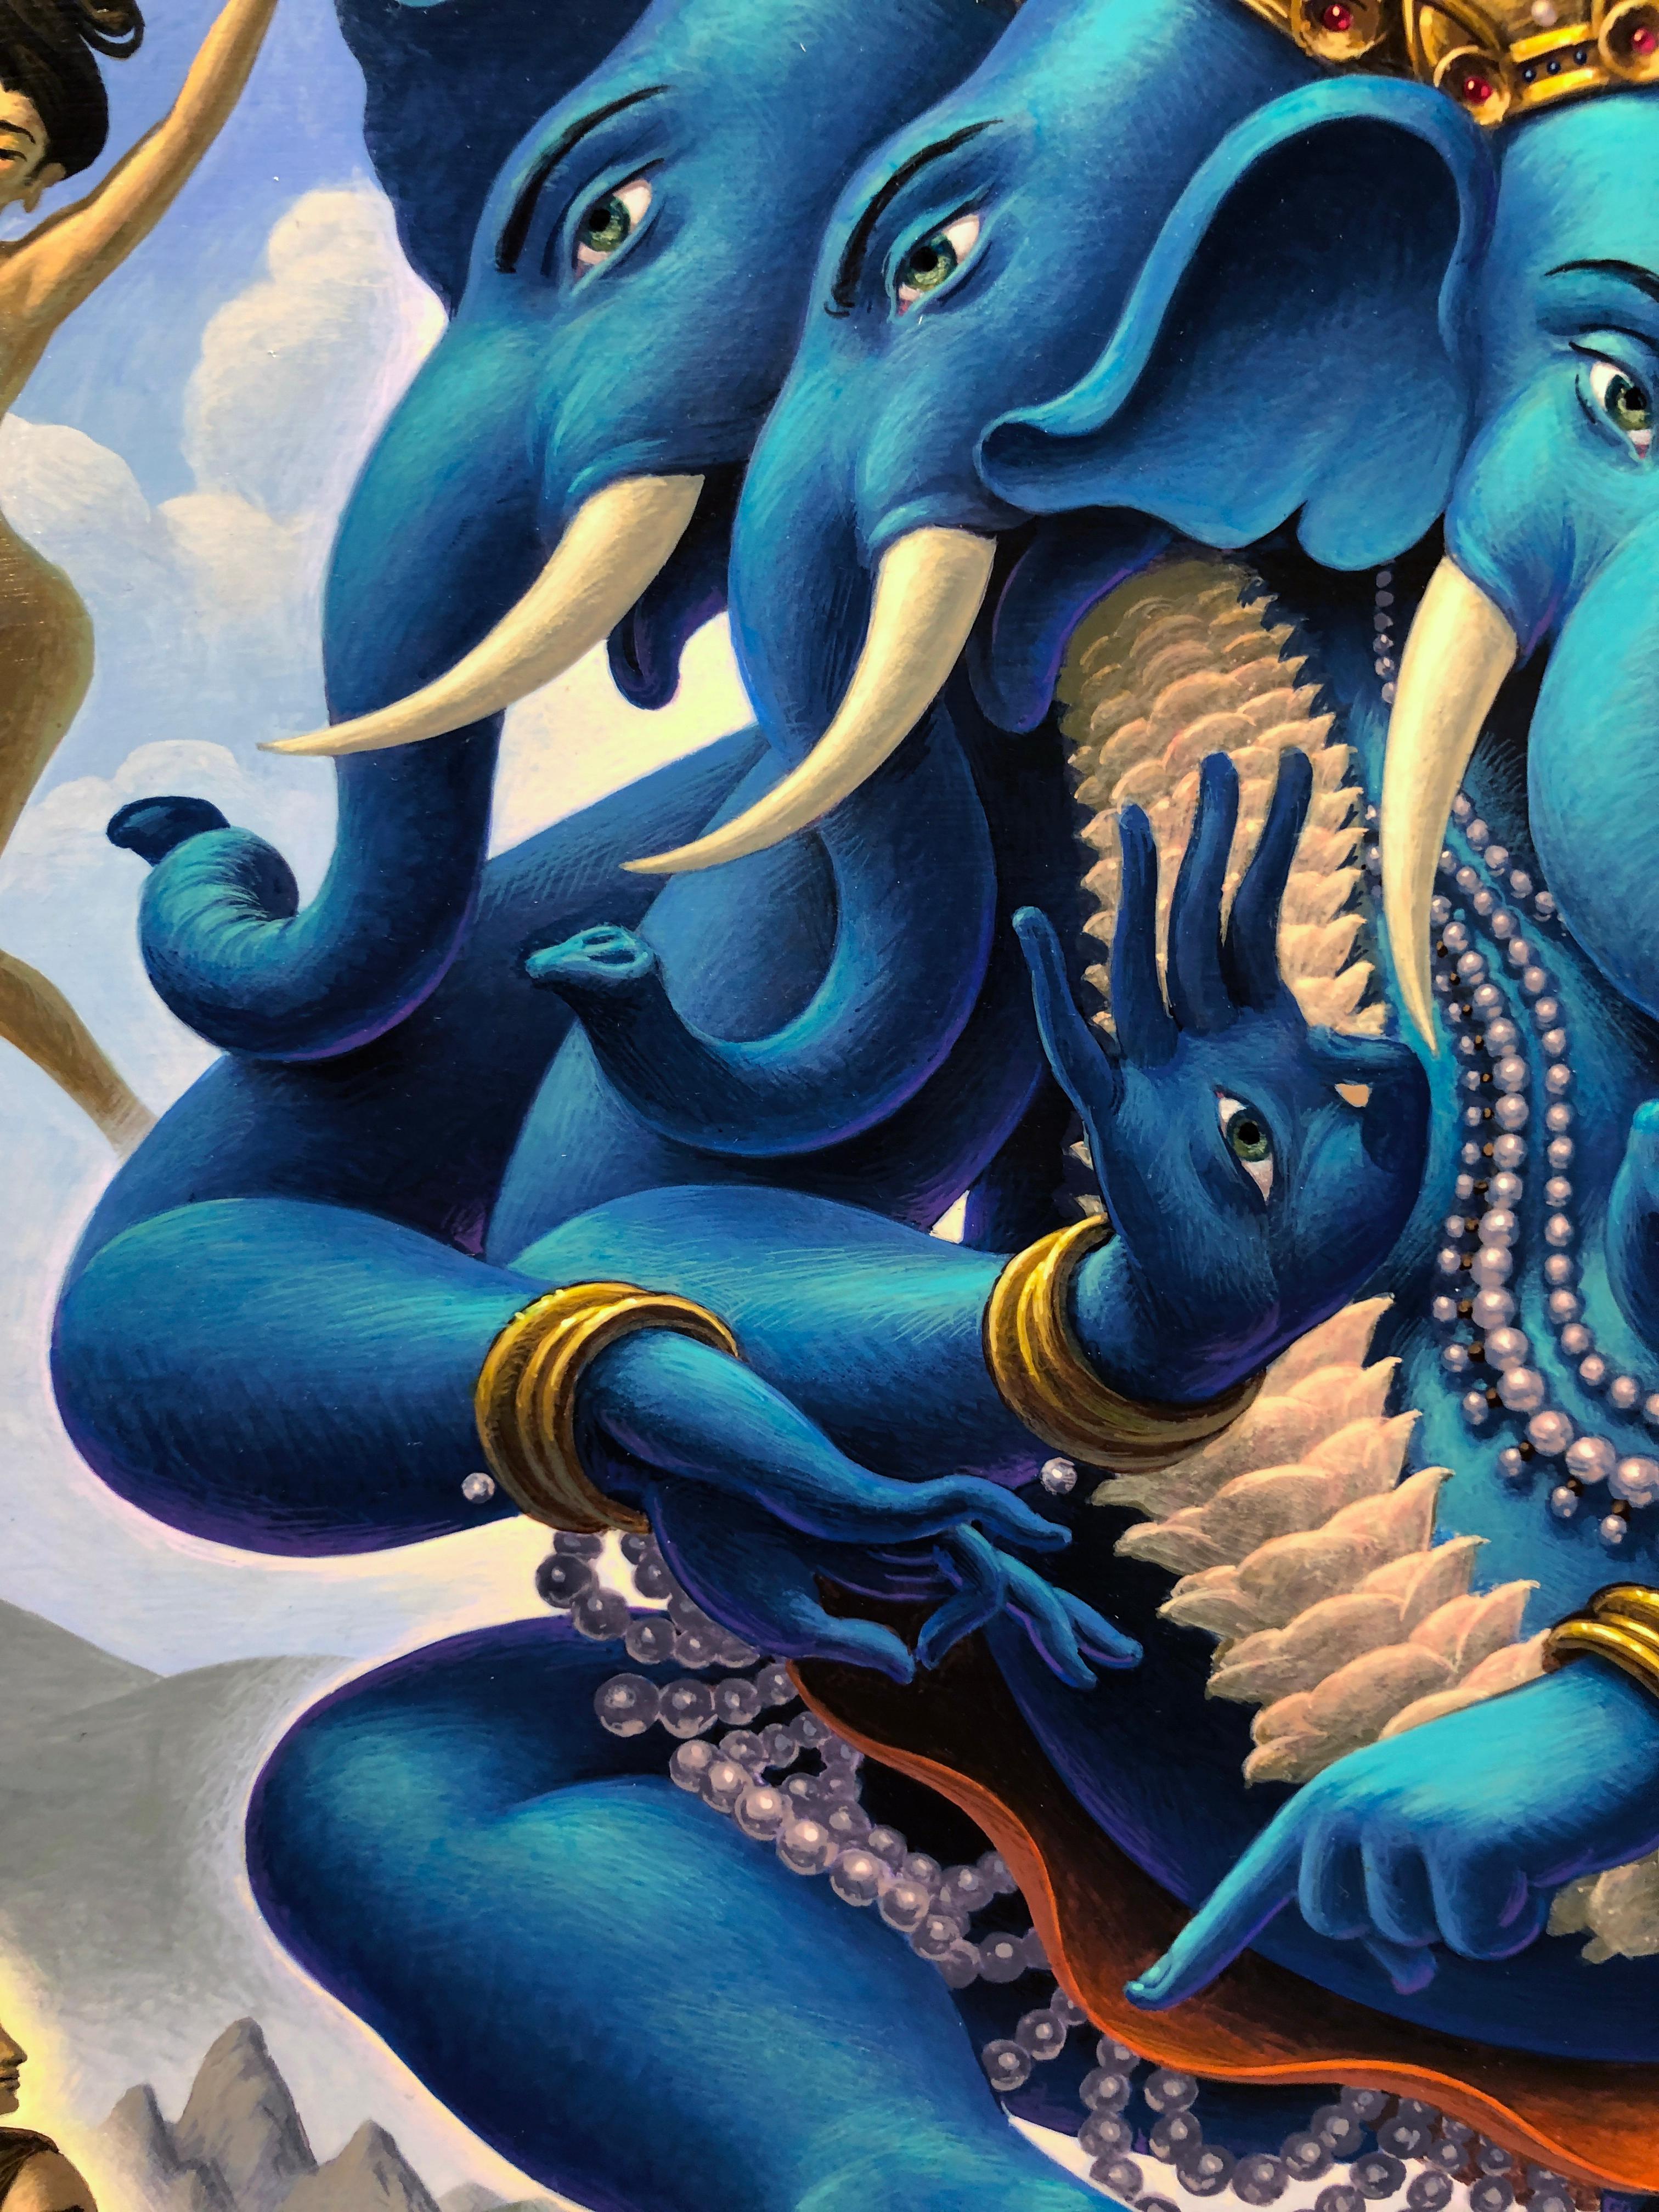 Ganesh at the Maelstrom - Highly Detailed Surreal, Symbolic Painting 6